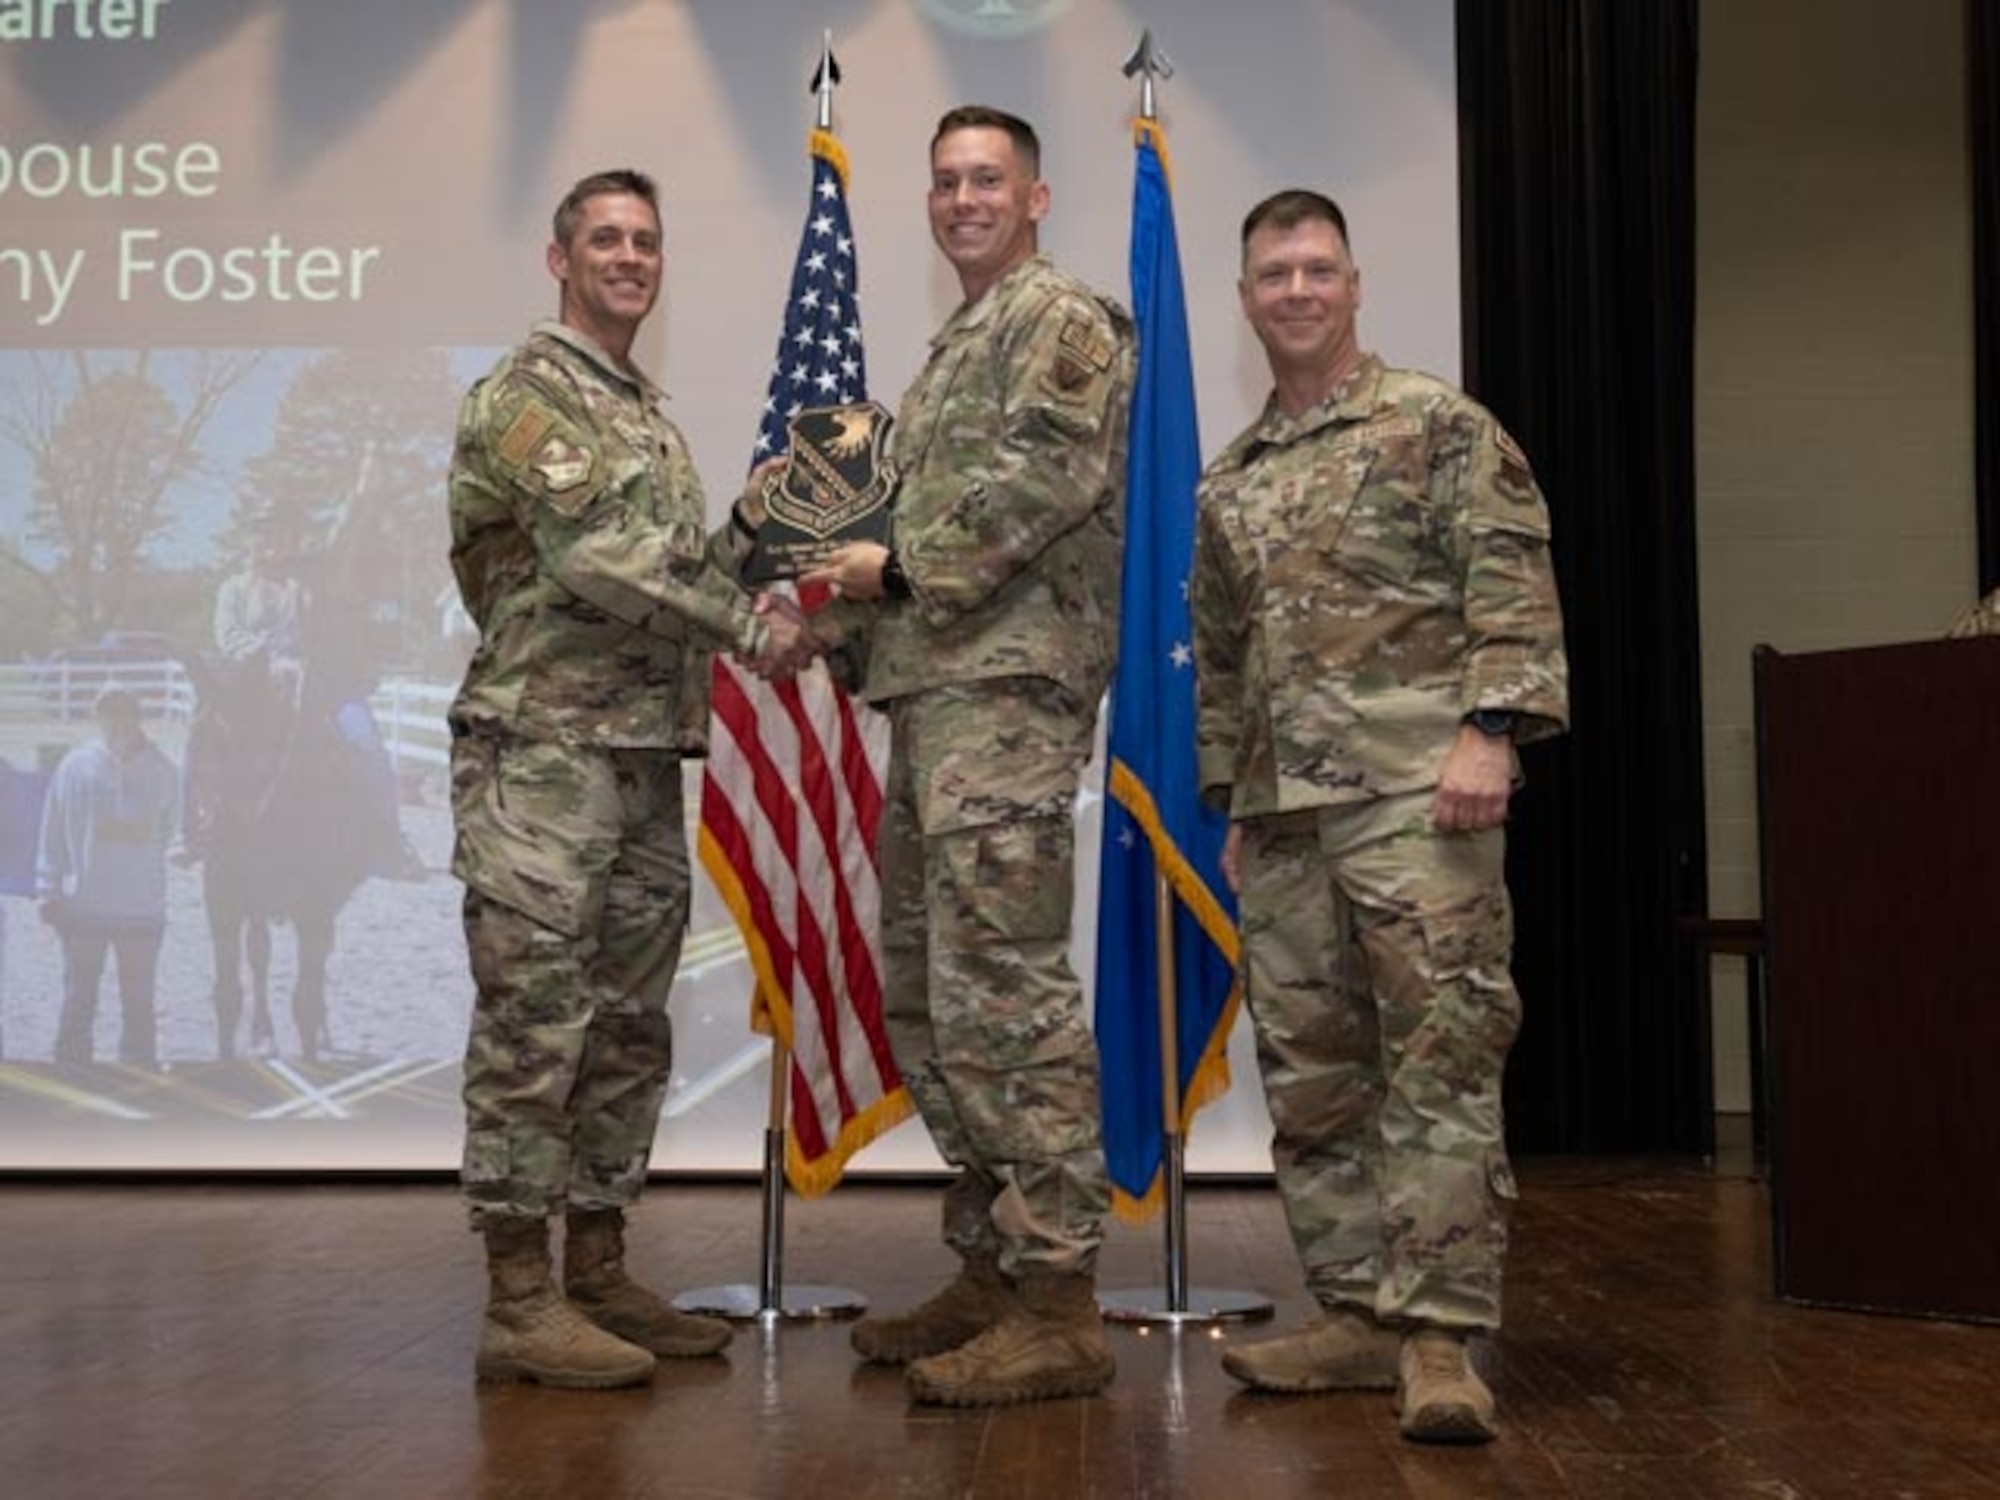 U.S. Air Force Lt. Col. James Melvin, left, Mission Support Group deputy commander, and Chief Master Sgt. Edward Mueller, right, Mission Support Group senior enlisted leader, Capt. Benjamin Gardner, center, who accepts the award on behalf of Brittany Foster, Key Spouse of the First Quarter Award at Seymour Johnson Air Force Base, North Carolina, April 19, 2024. The ceremony recognized 10 individual award winners and one team for outstanding performance. (U.S. Air Force photo by Airman Megan Cusmano)